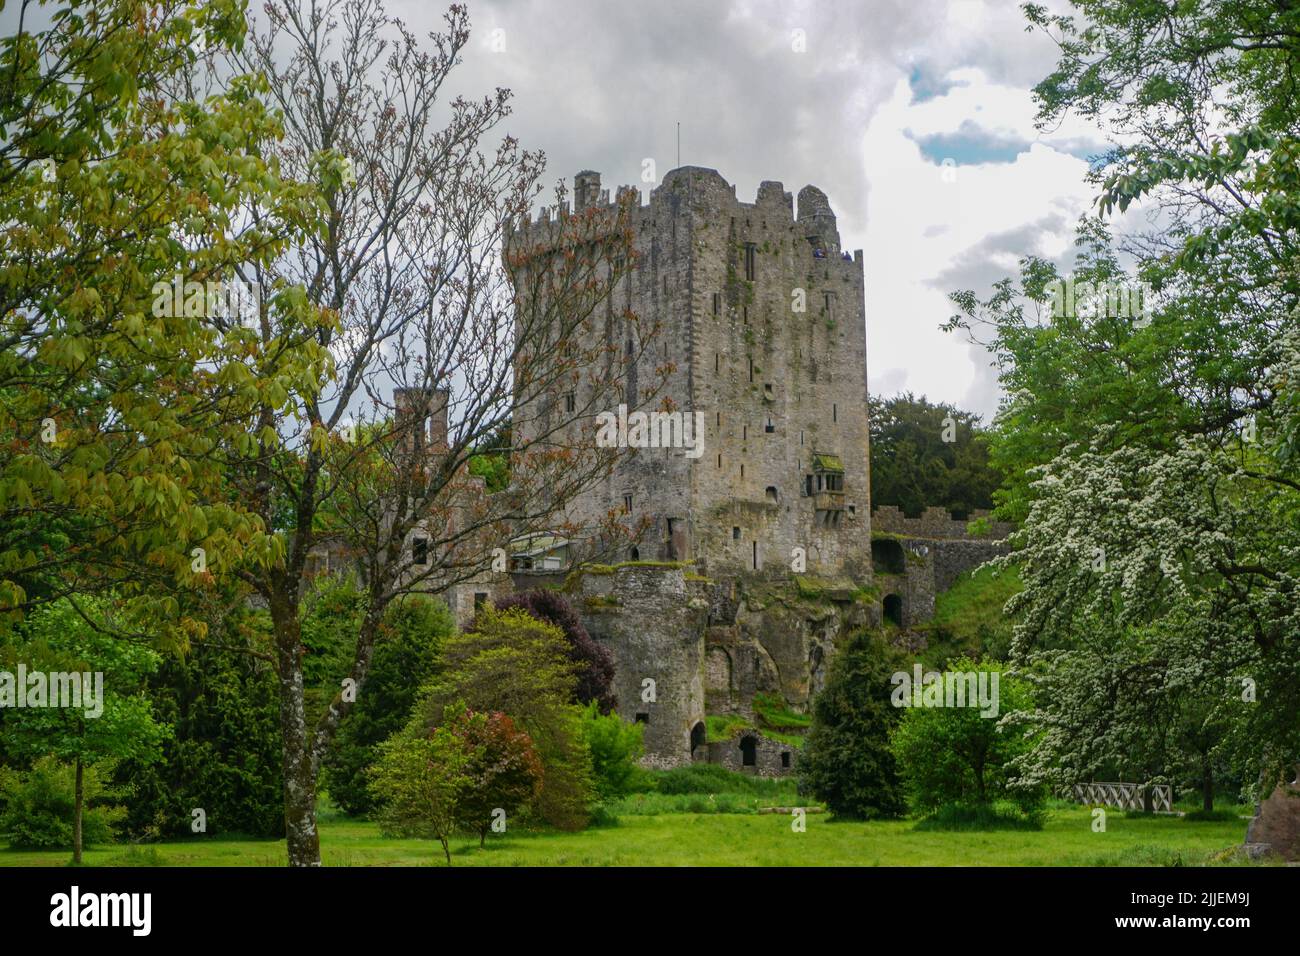 Blarney, Co. Cork, Ireland: Blarney Castle, home of the famous Blarney Stone, is a medieval stronghold built in 1446. Stock Photo